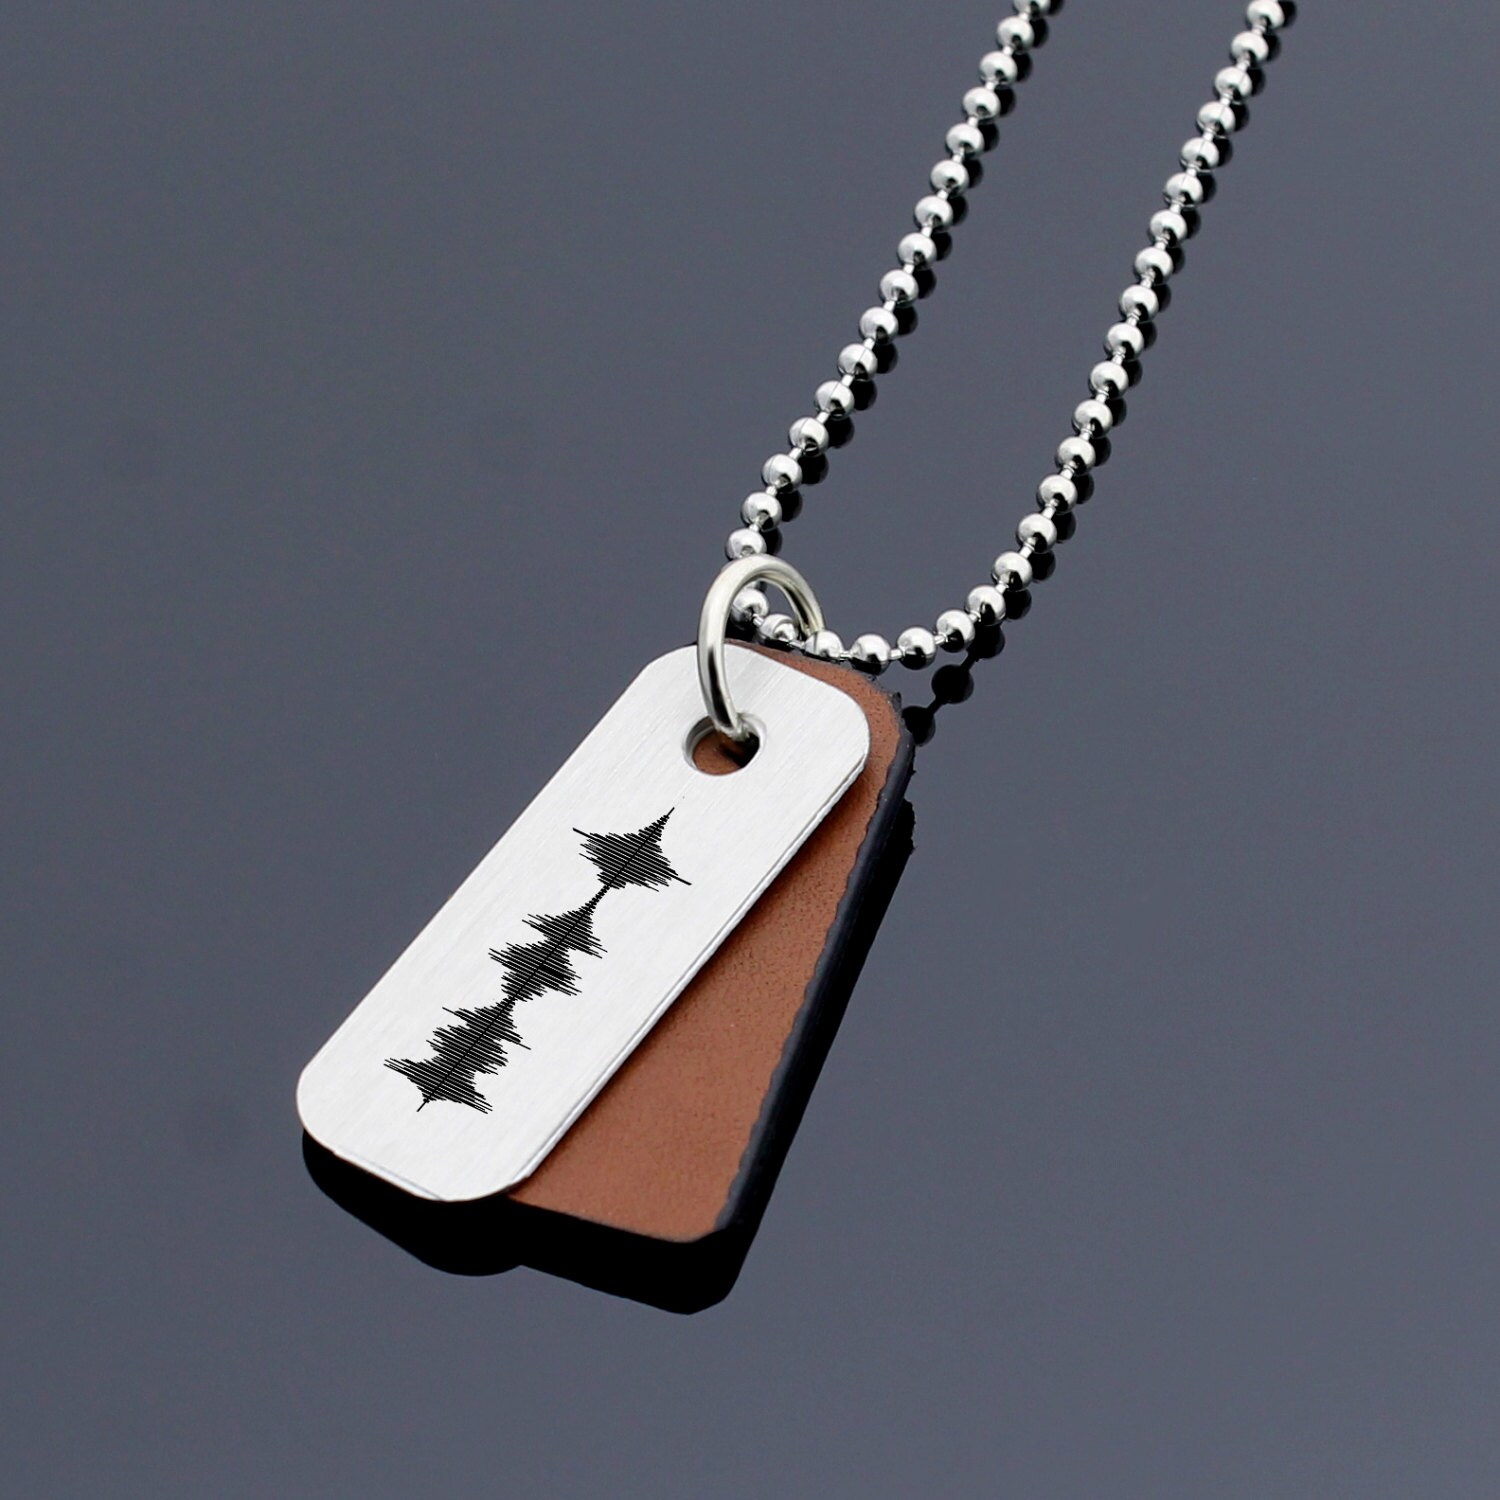 Personalized Sound Waves Necklace Voice Recording Memorial